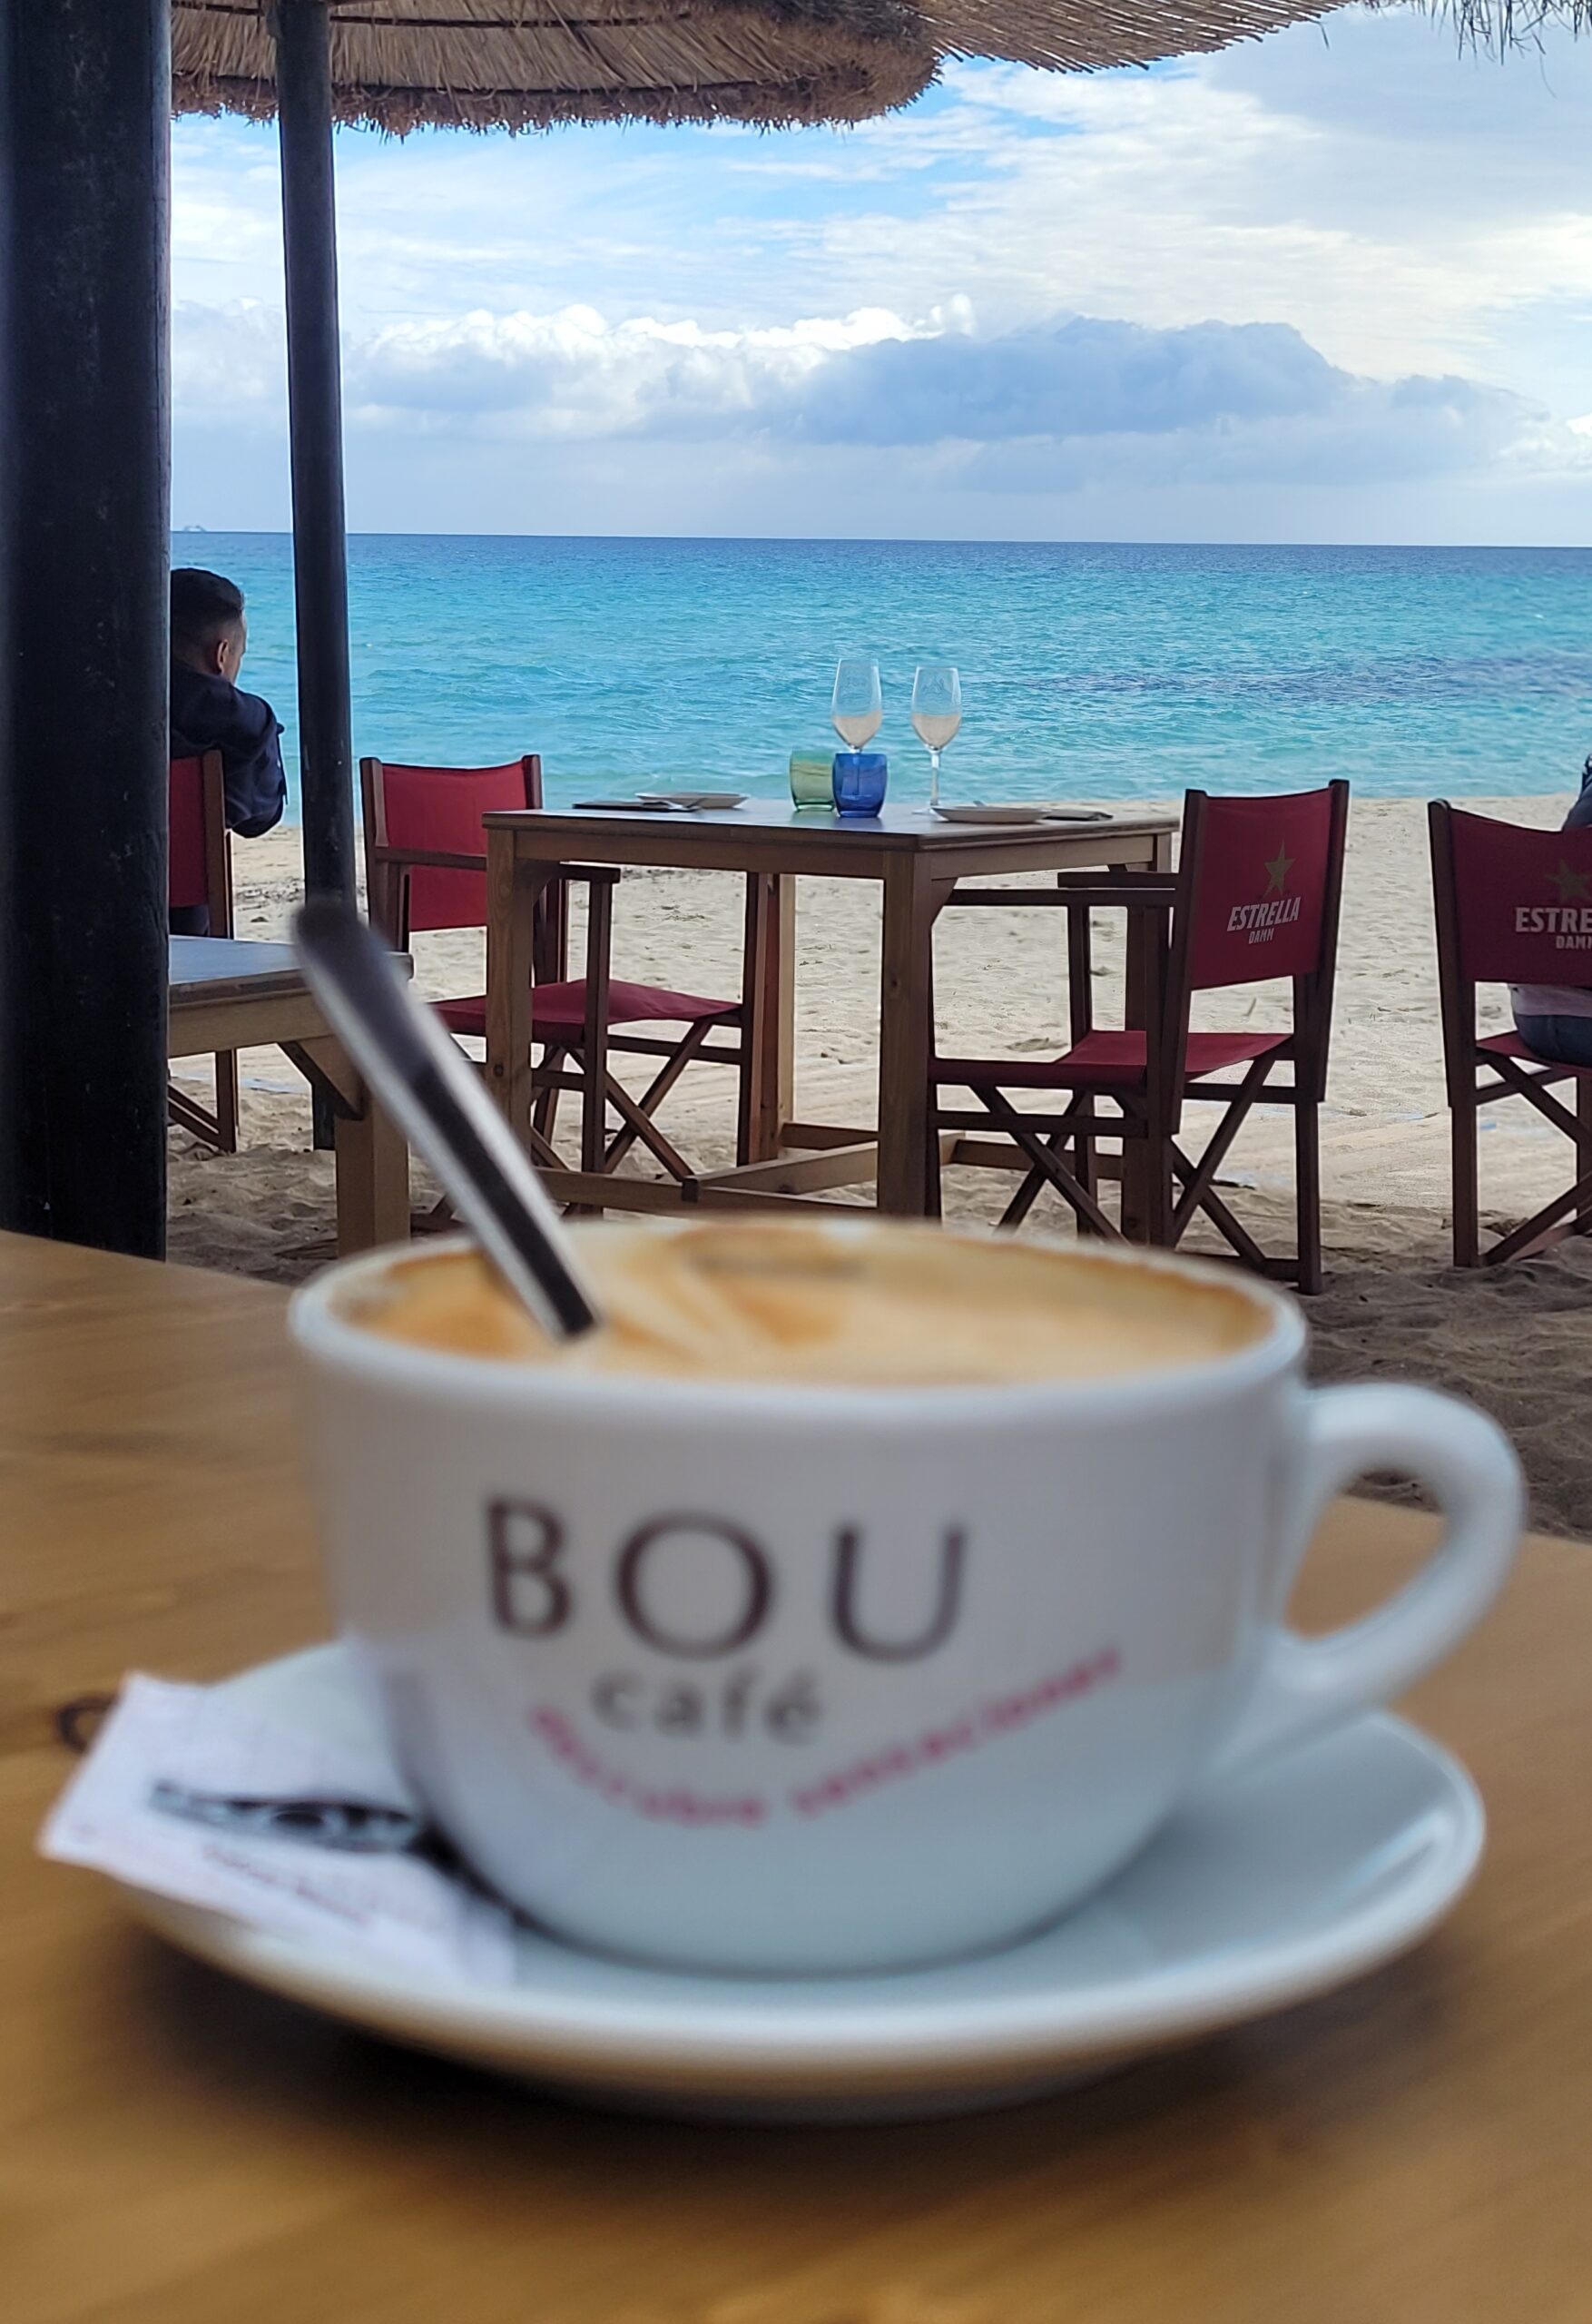 a cup of coffee at a beach bar enhances your travel experiences!